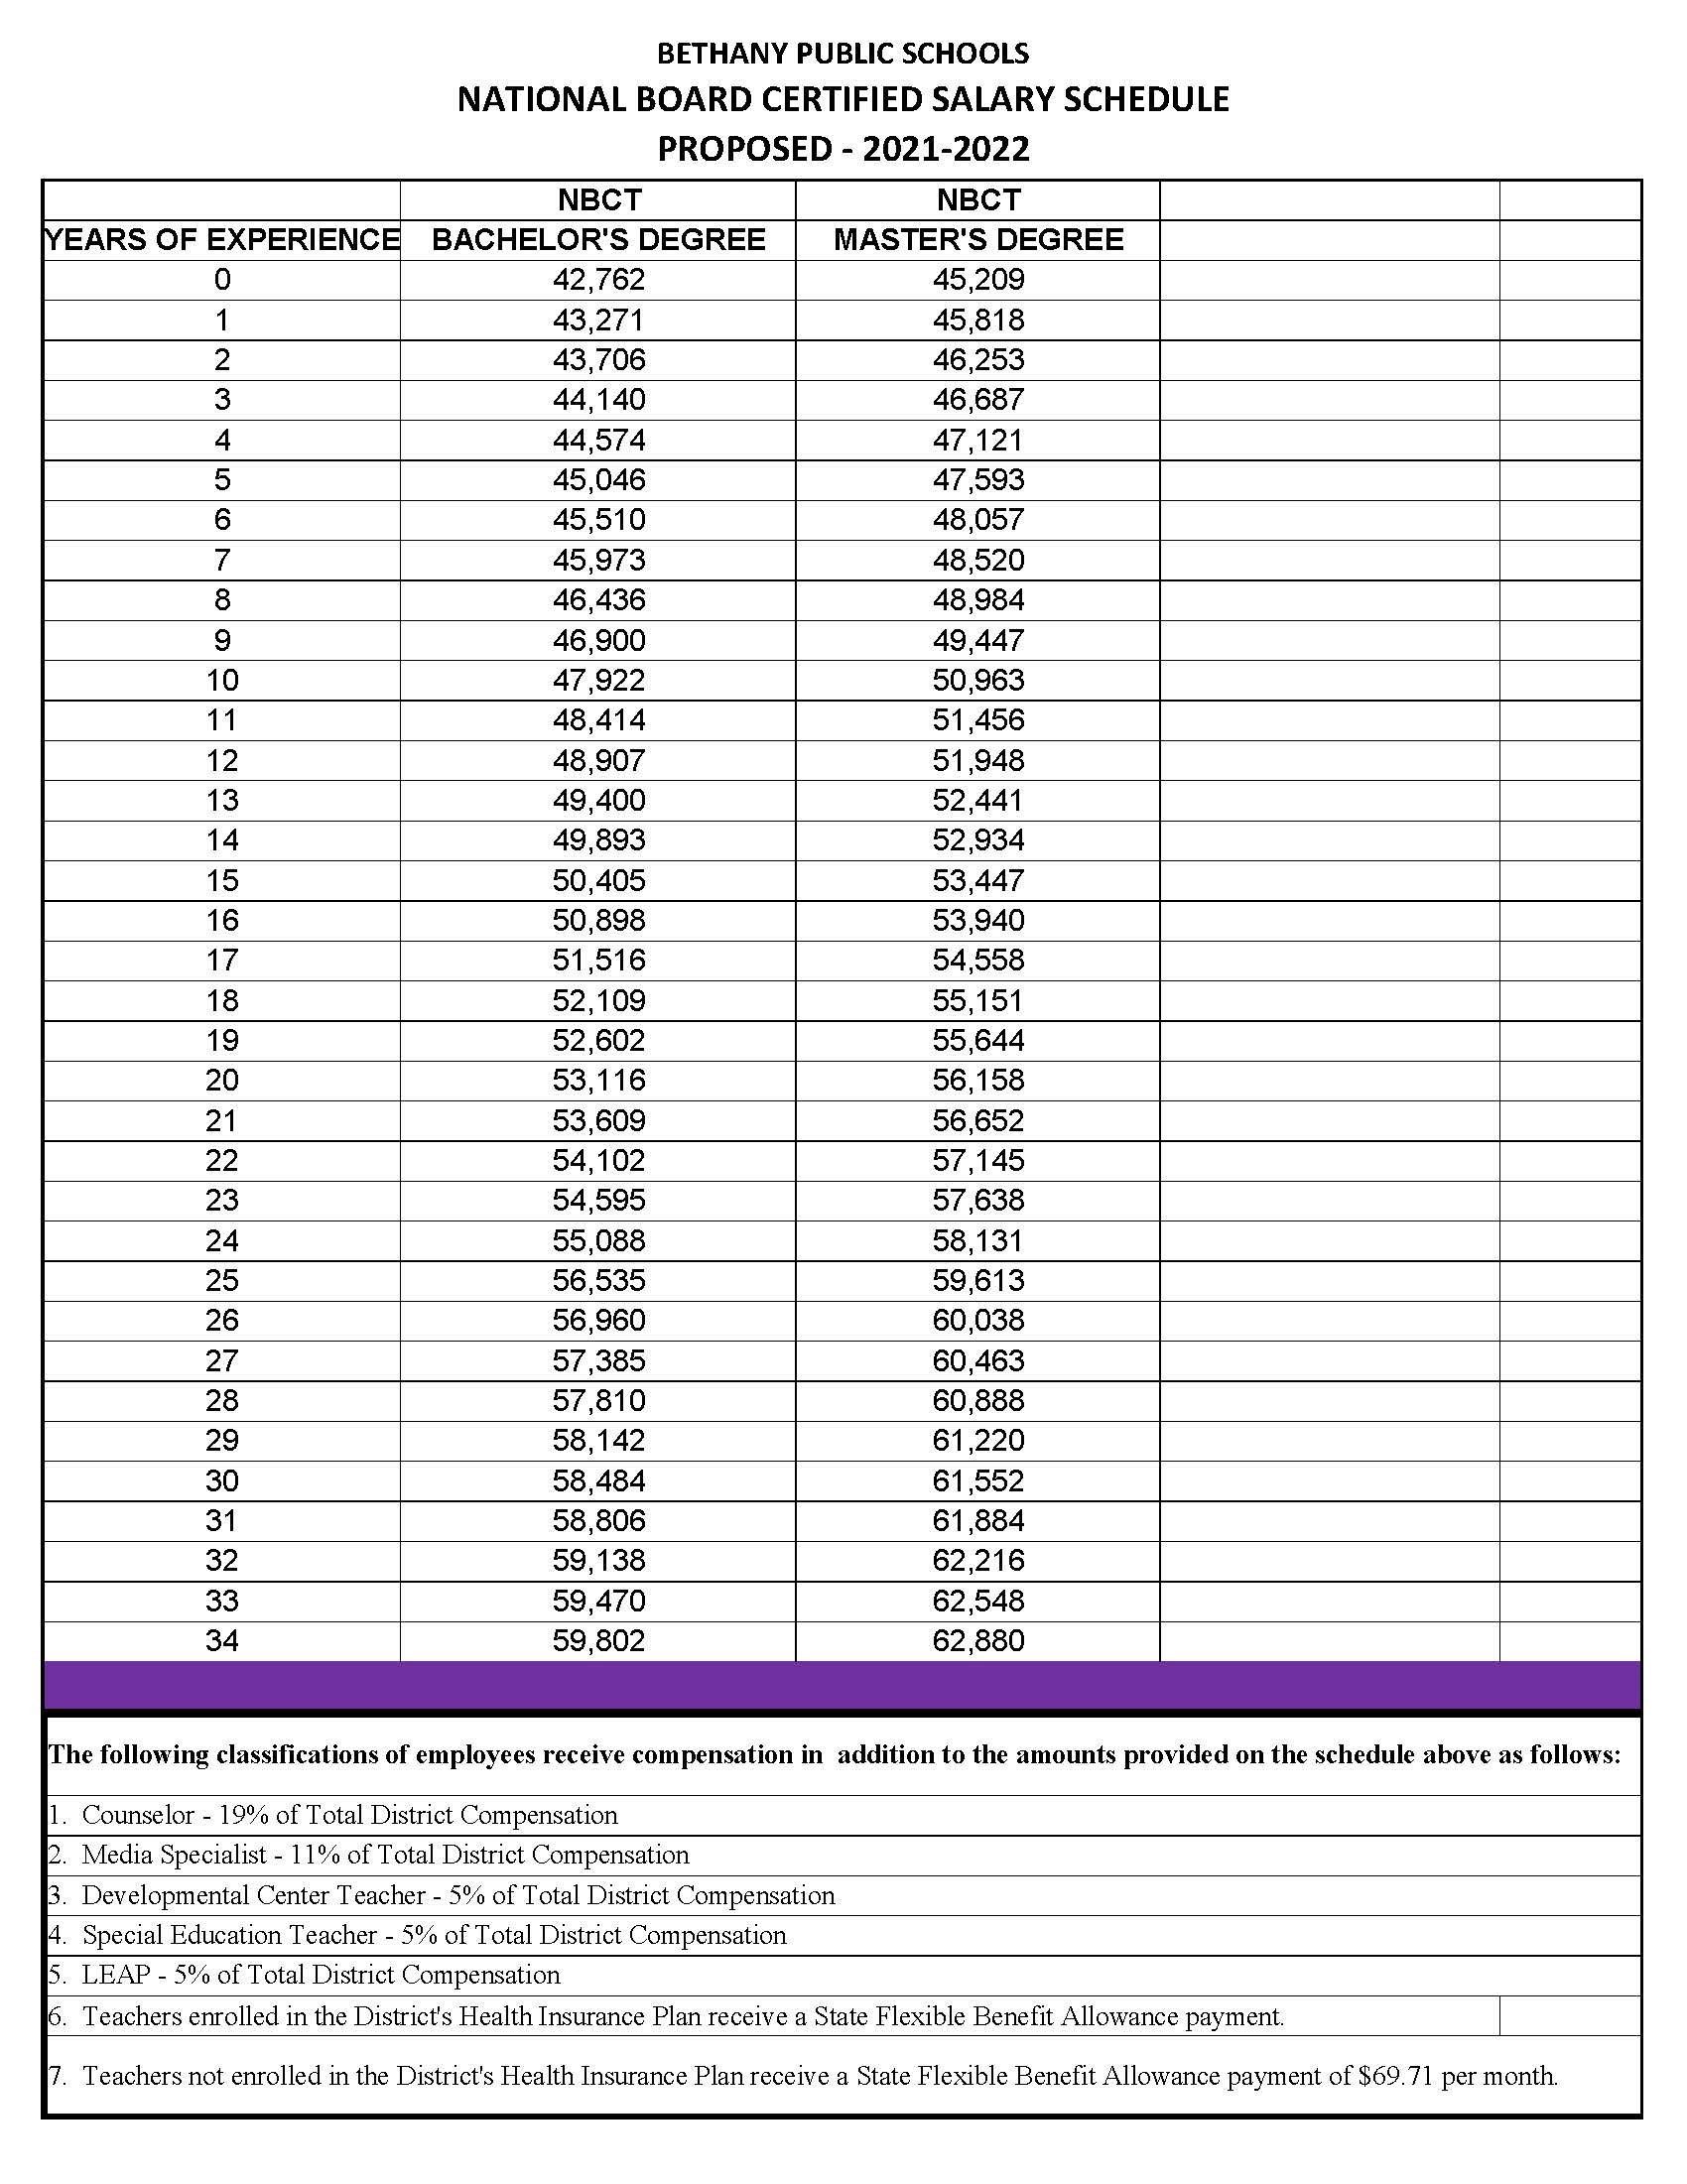 2021-22 National Board Certified Salary Schedule